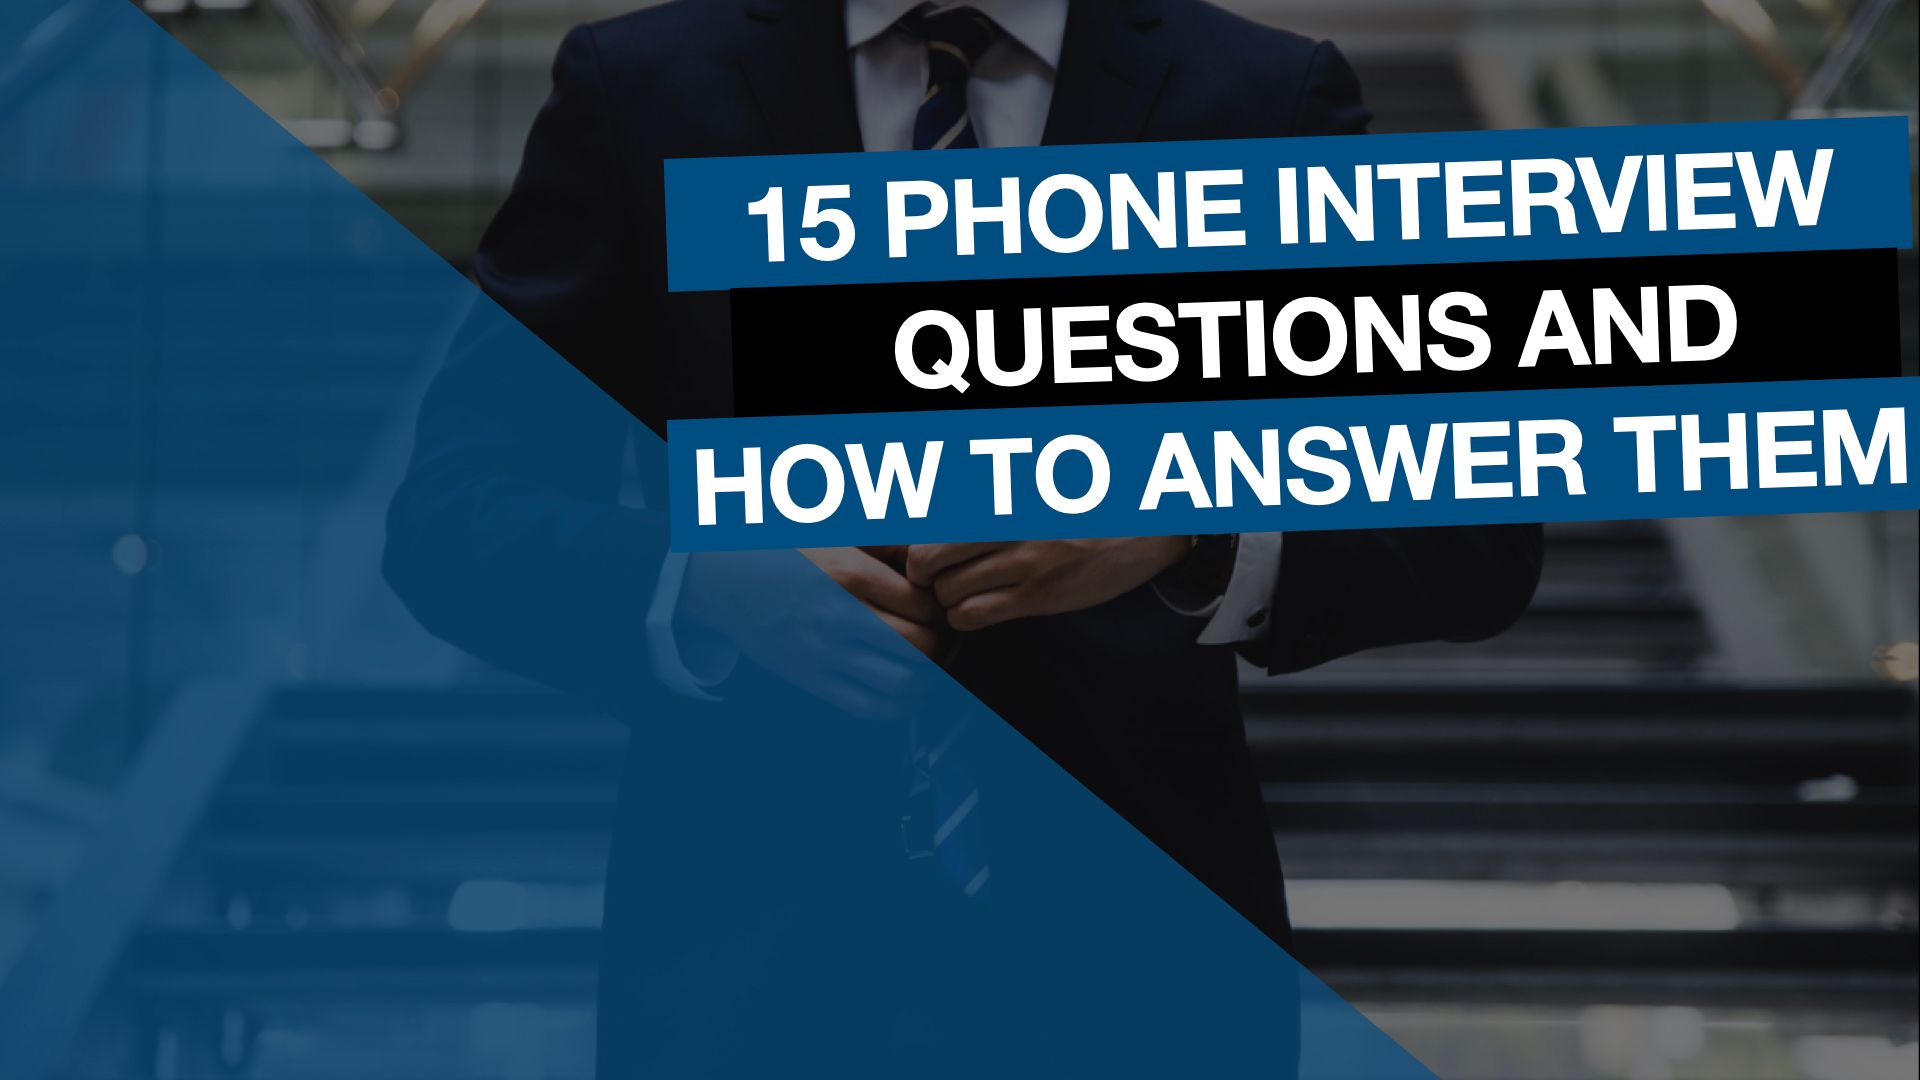 15 Phone Interview Questions and How to Answer Them